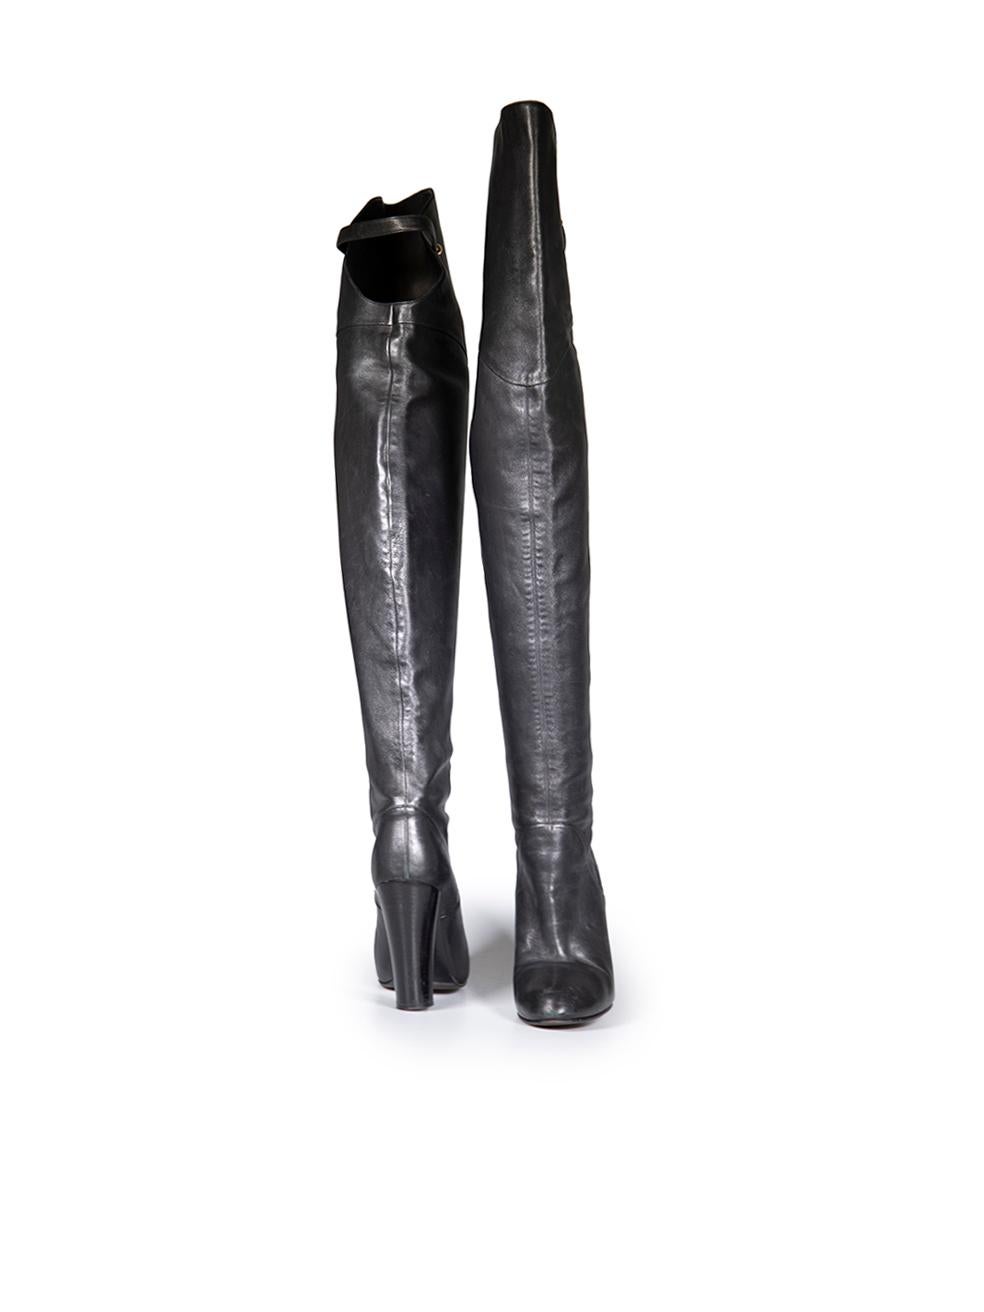 Sergio Rossi Black Leather Thigh High Boots Size IT 38 In Good Condition For Sale In London, GB